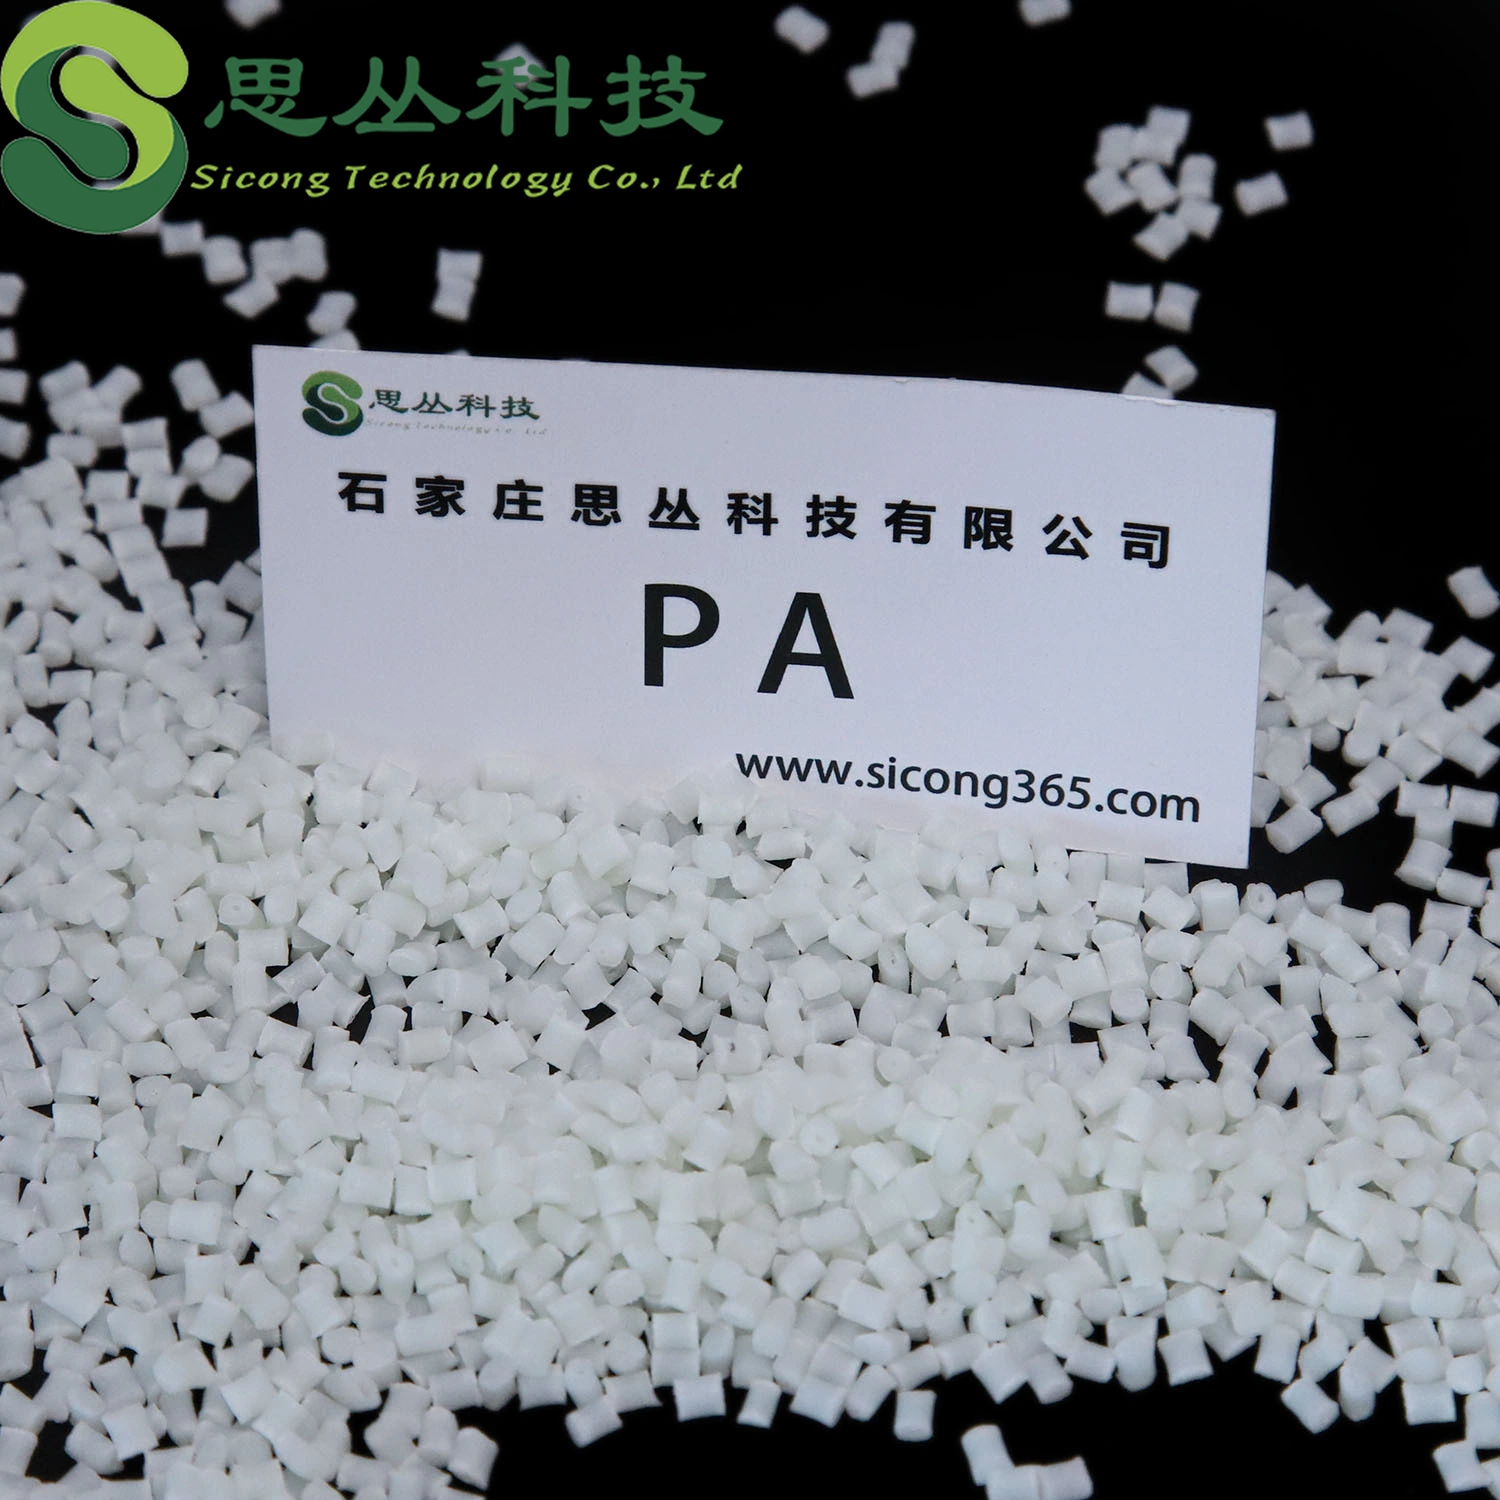 Wholesale PA Plastic Raw Material PA Resin PA for Automotive Nylon Pipes